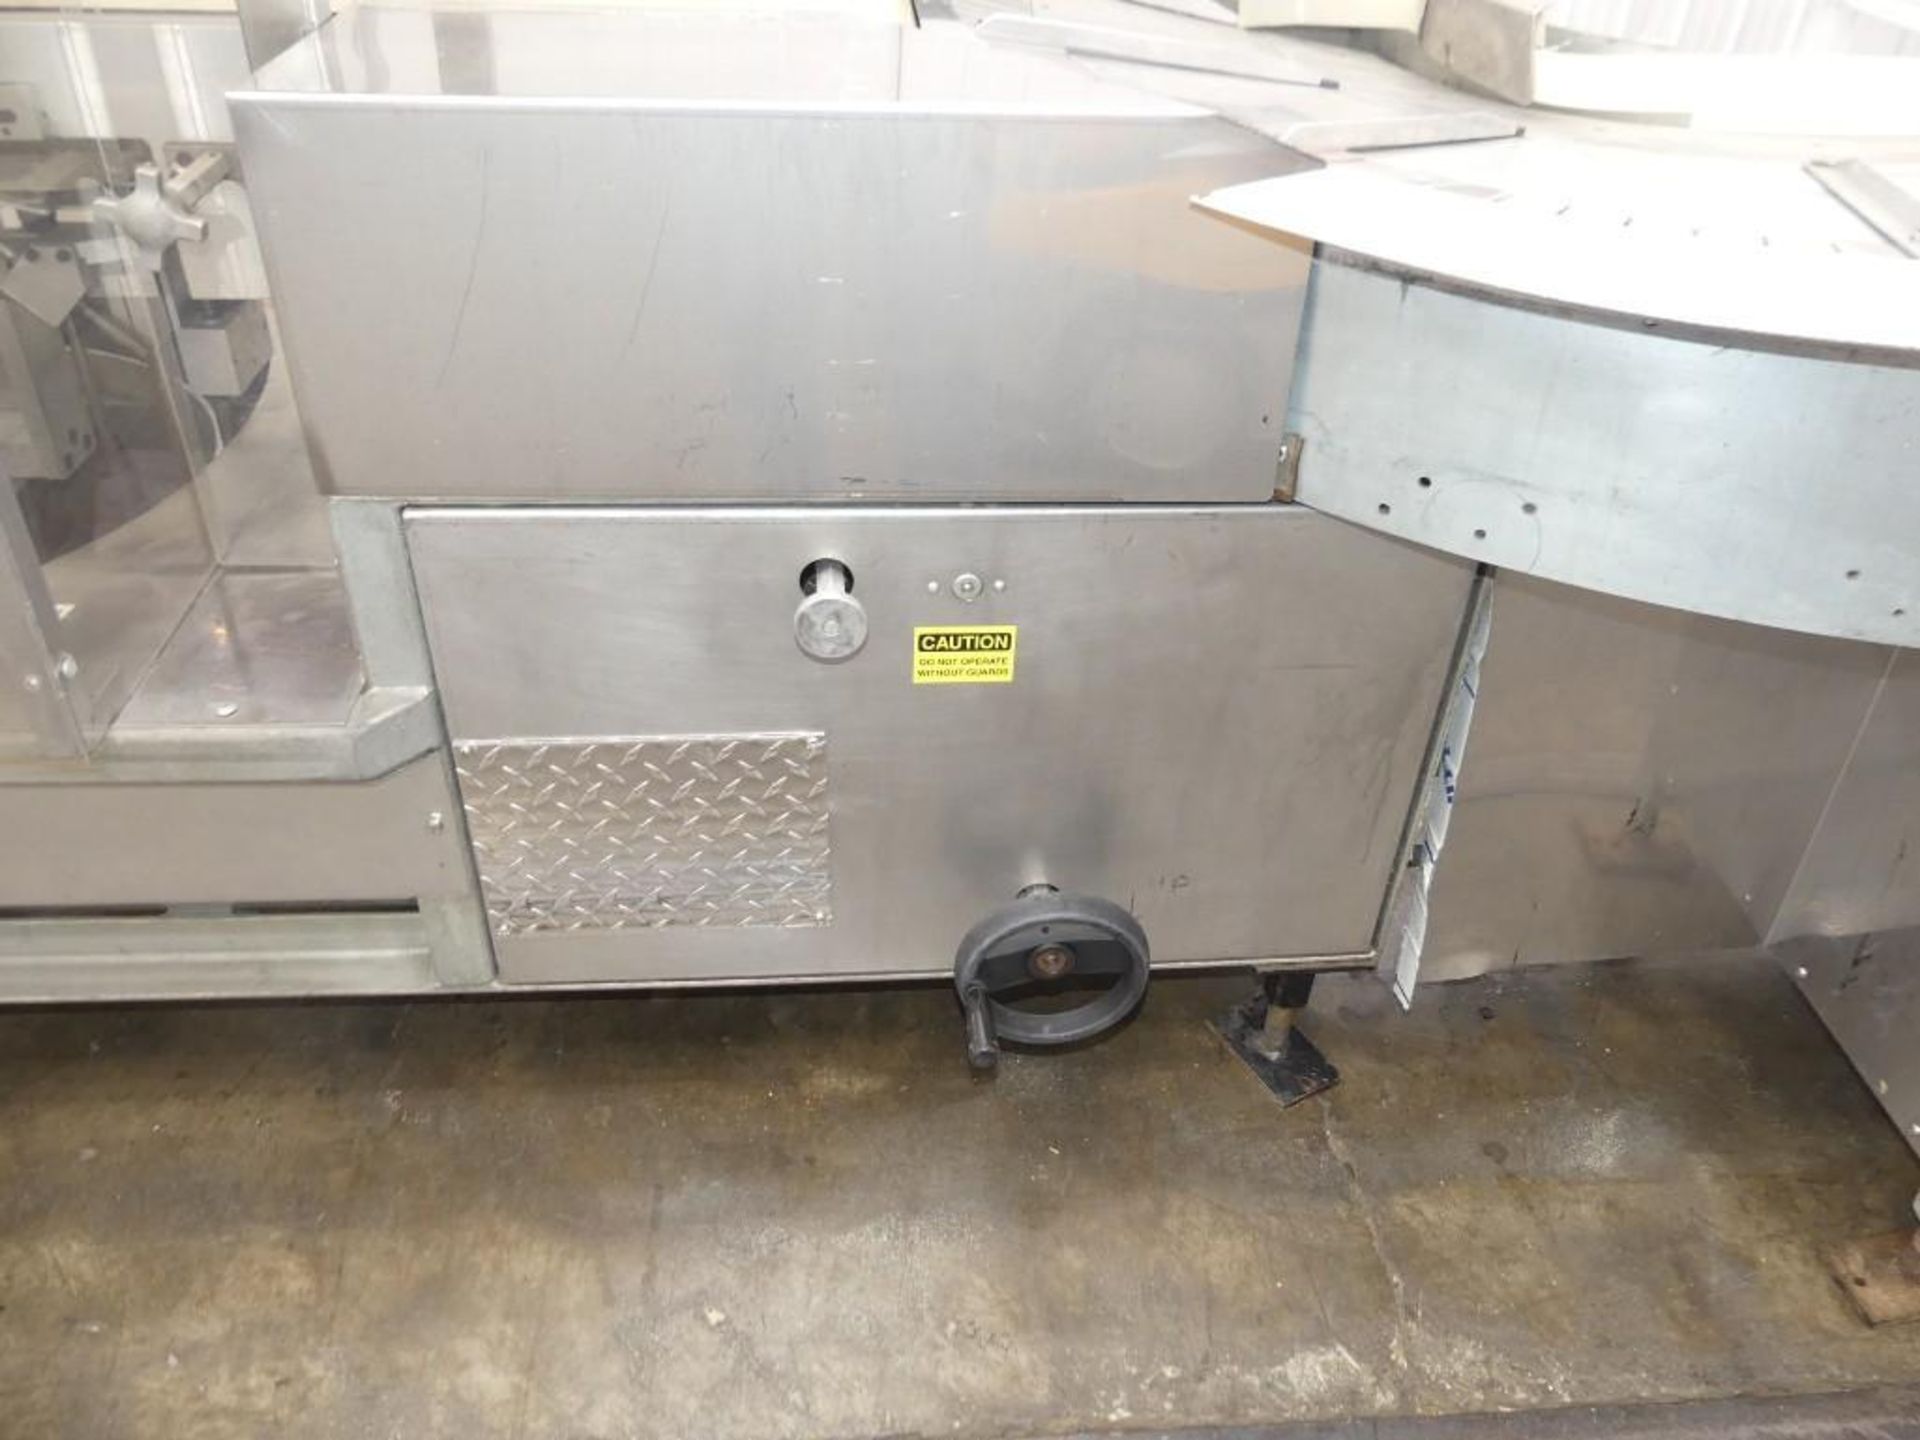 UBE 1216 Stainless Steel Hand Load Bread Bagger - Image 17 of 38